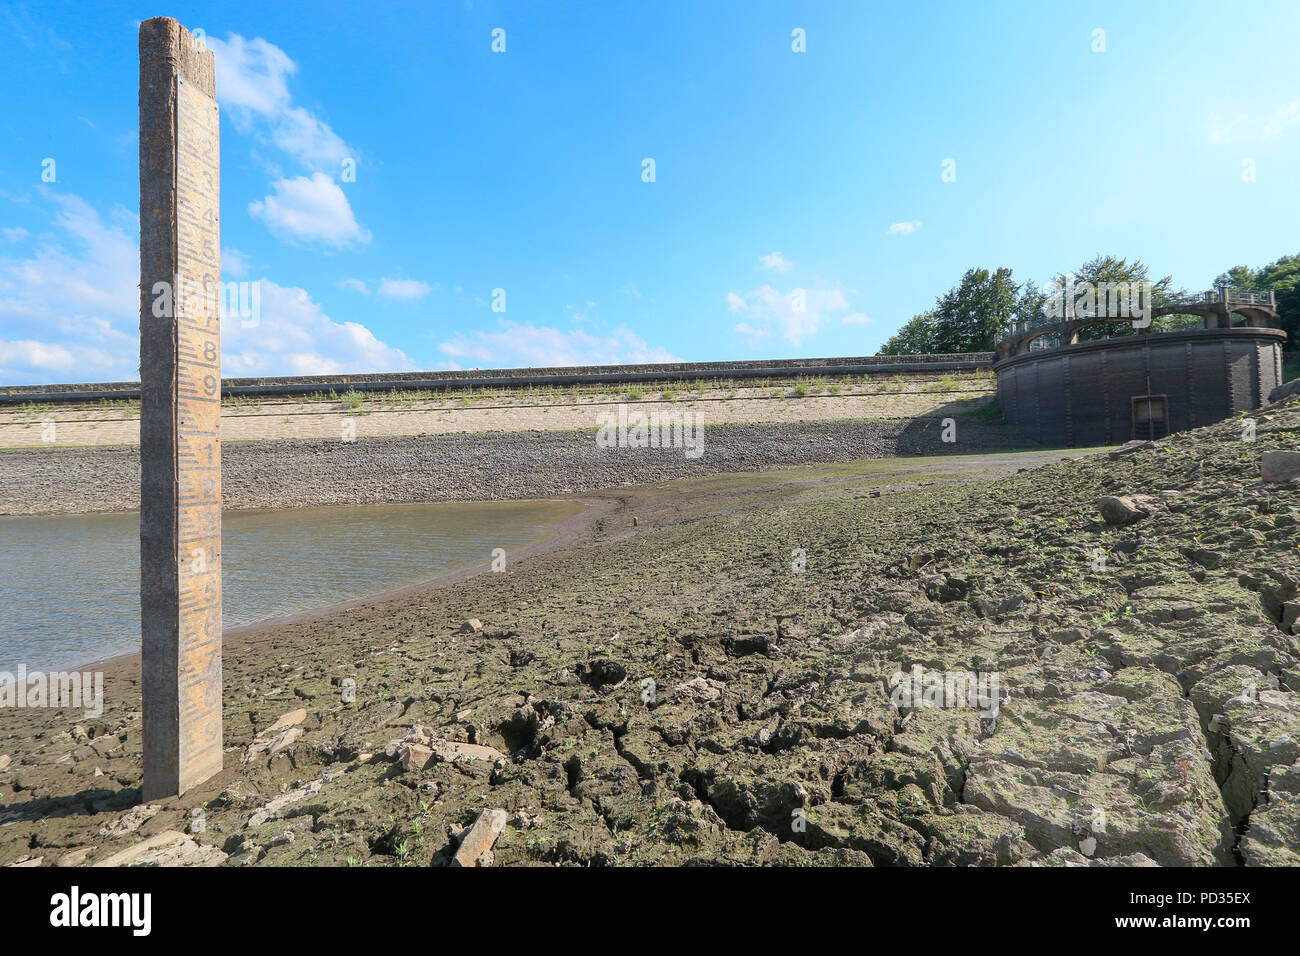 Wayoh Reservoir, Entwistle, Bolton, Lancs, UK. 5 August 2018. Wayoh Reservoir, Entwistle, Bolton, Lancs, UK.  The United Utilities reservoir is continuing to show very low levels, despite rain last weekend and cooler weather following the recent heatwave. Marker boards seem to indicate a water level 10 metres below normal levels. United Utilities had planned to introduce a hosepipe ban on Sunday 5 August 2018, but called it off at the last minute citing improved  water levels and colder weather. Credit: Phil Taylor/Alamy Live News Stock Photo